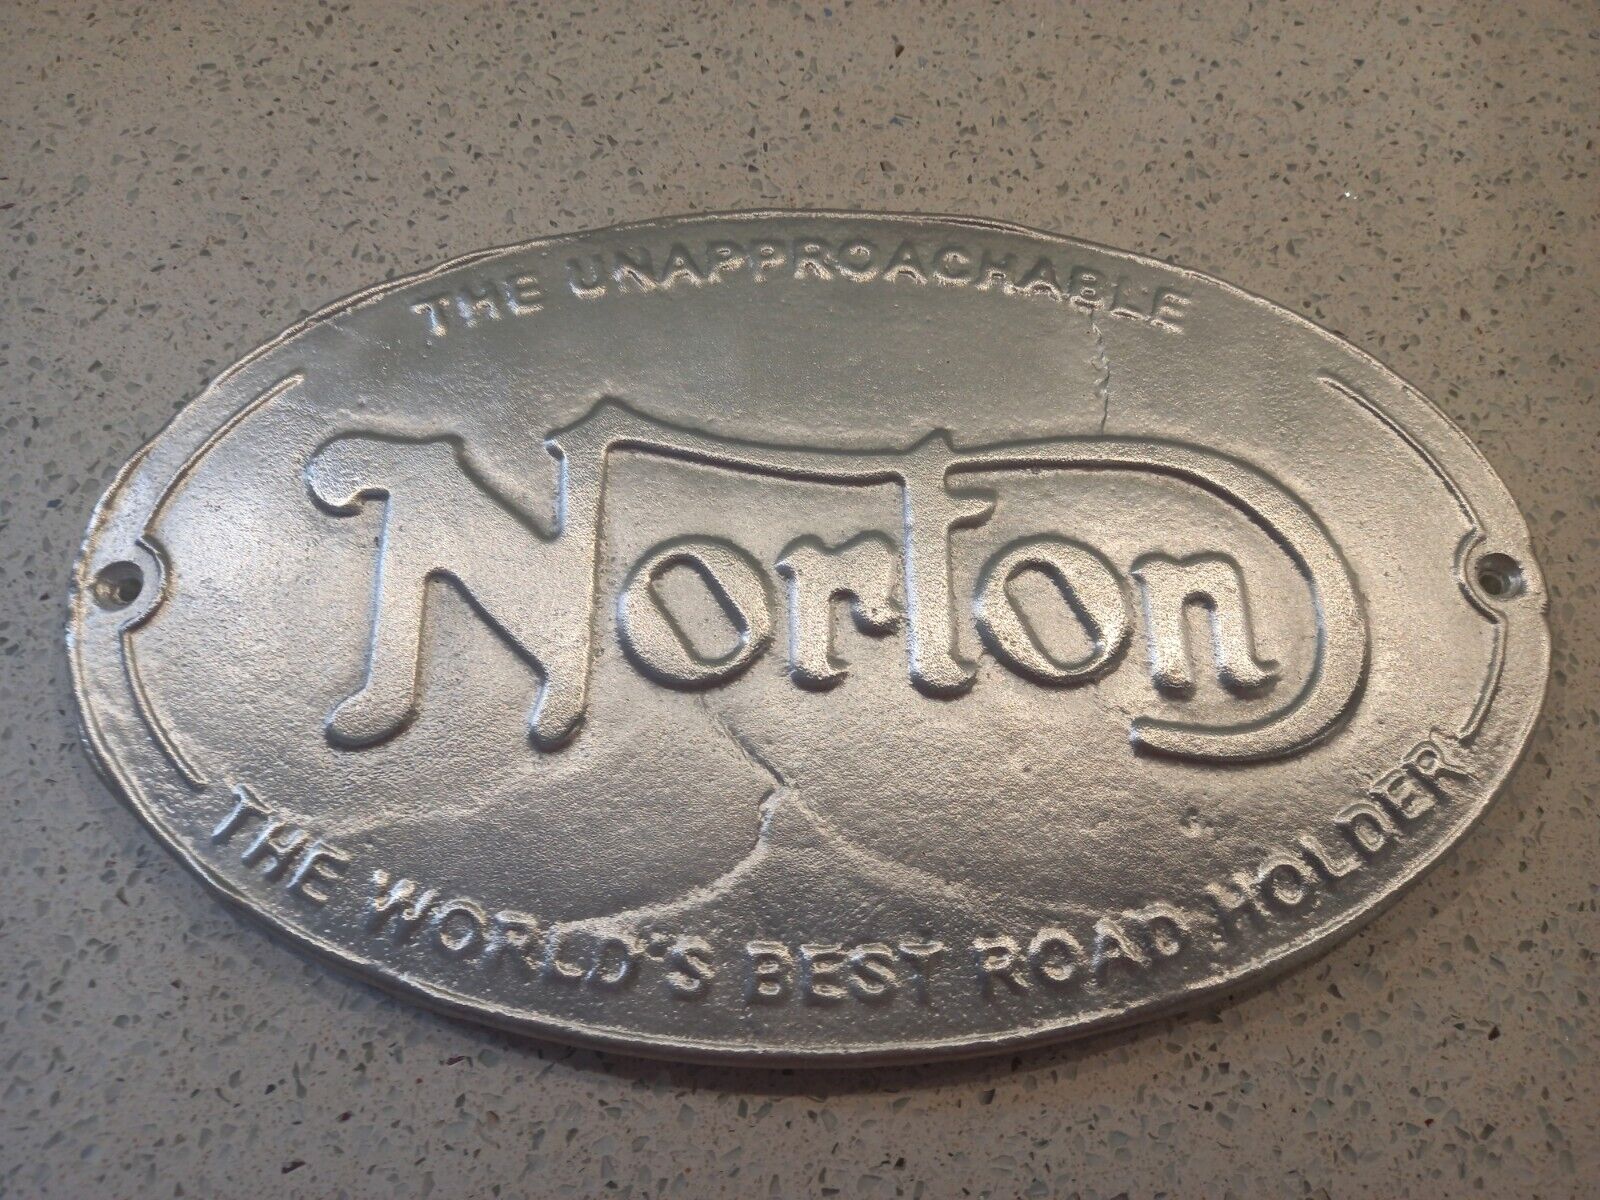 Norton The Unapproachable Cast Aluminium Sign Garage Motorcycle Plaque Not Iron